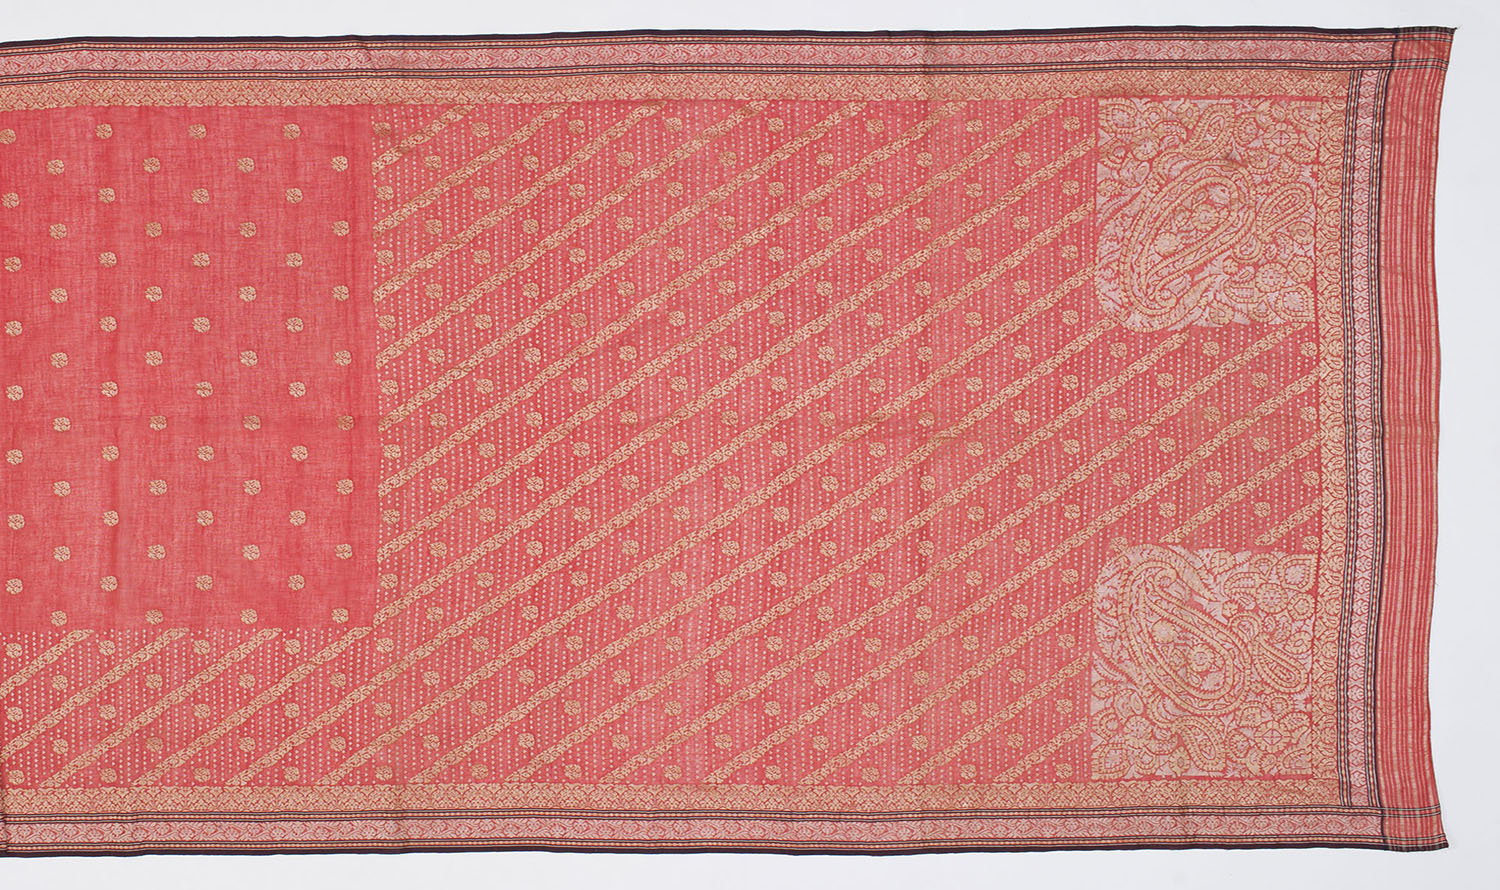 A Jamdani saree with a central field of circular floral motifs, dense borders and squares of paisley motifs in each corner.